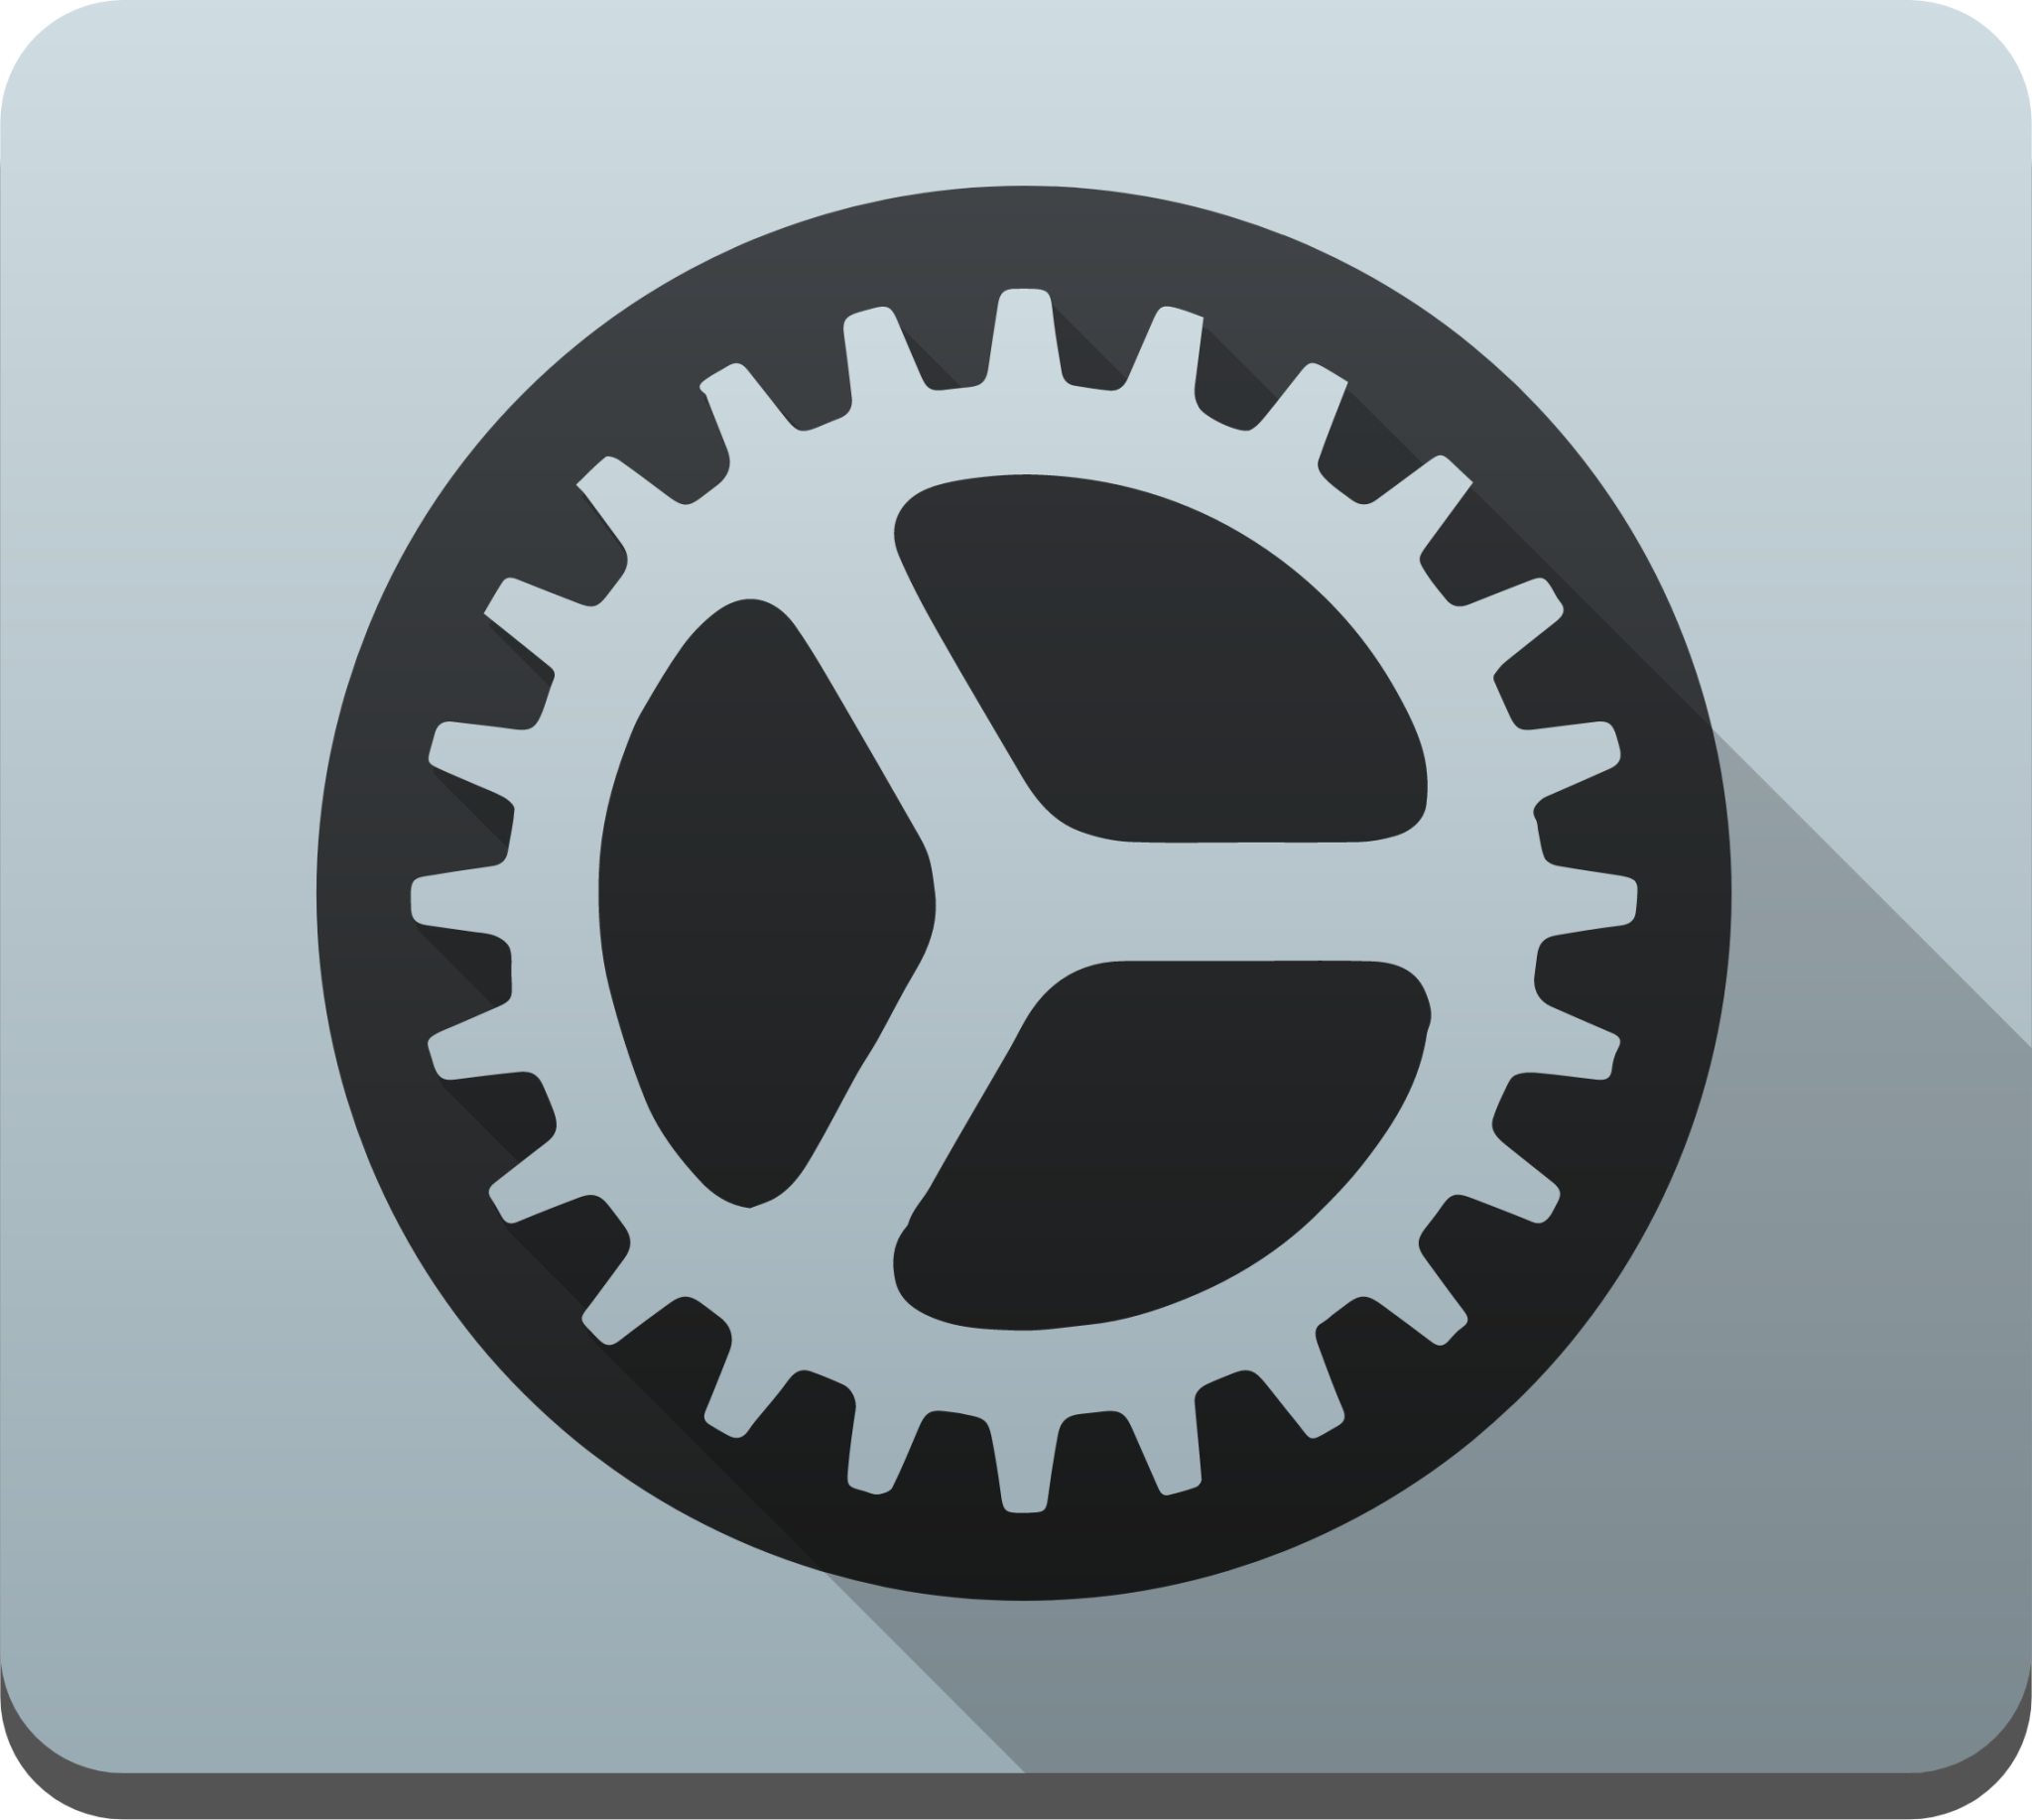 system preferences icon png